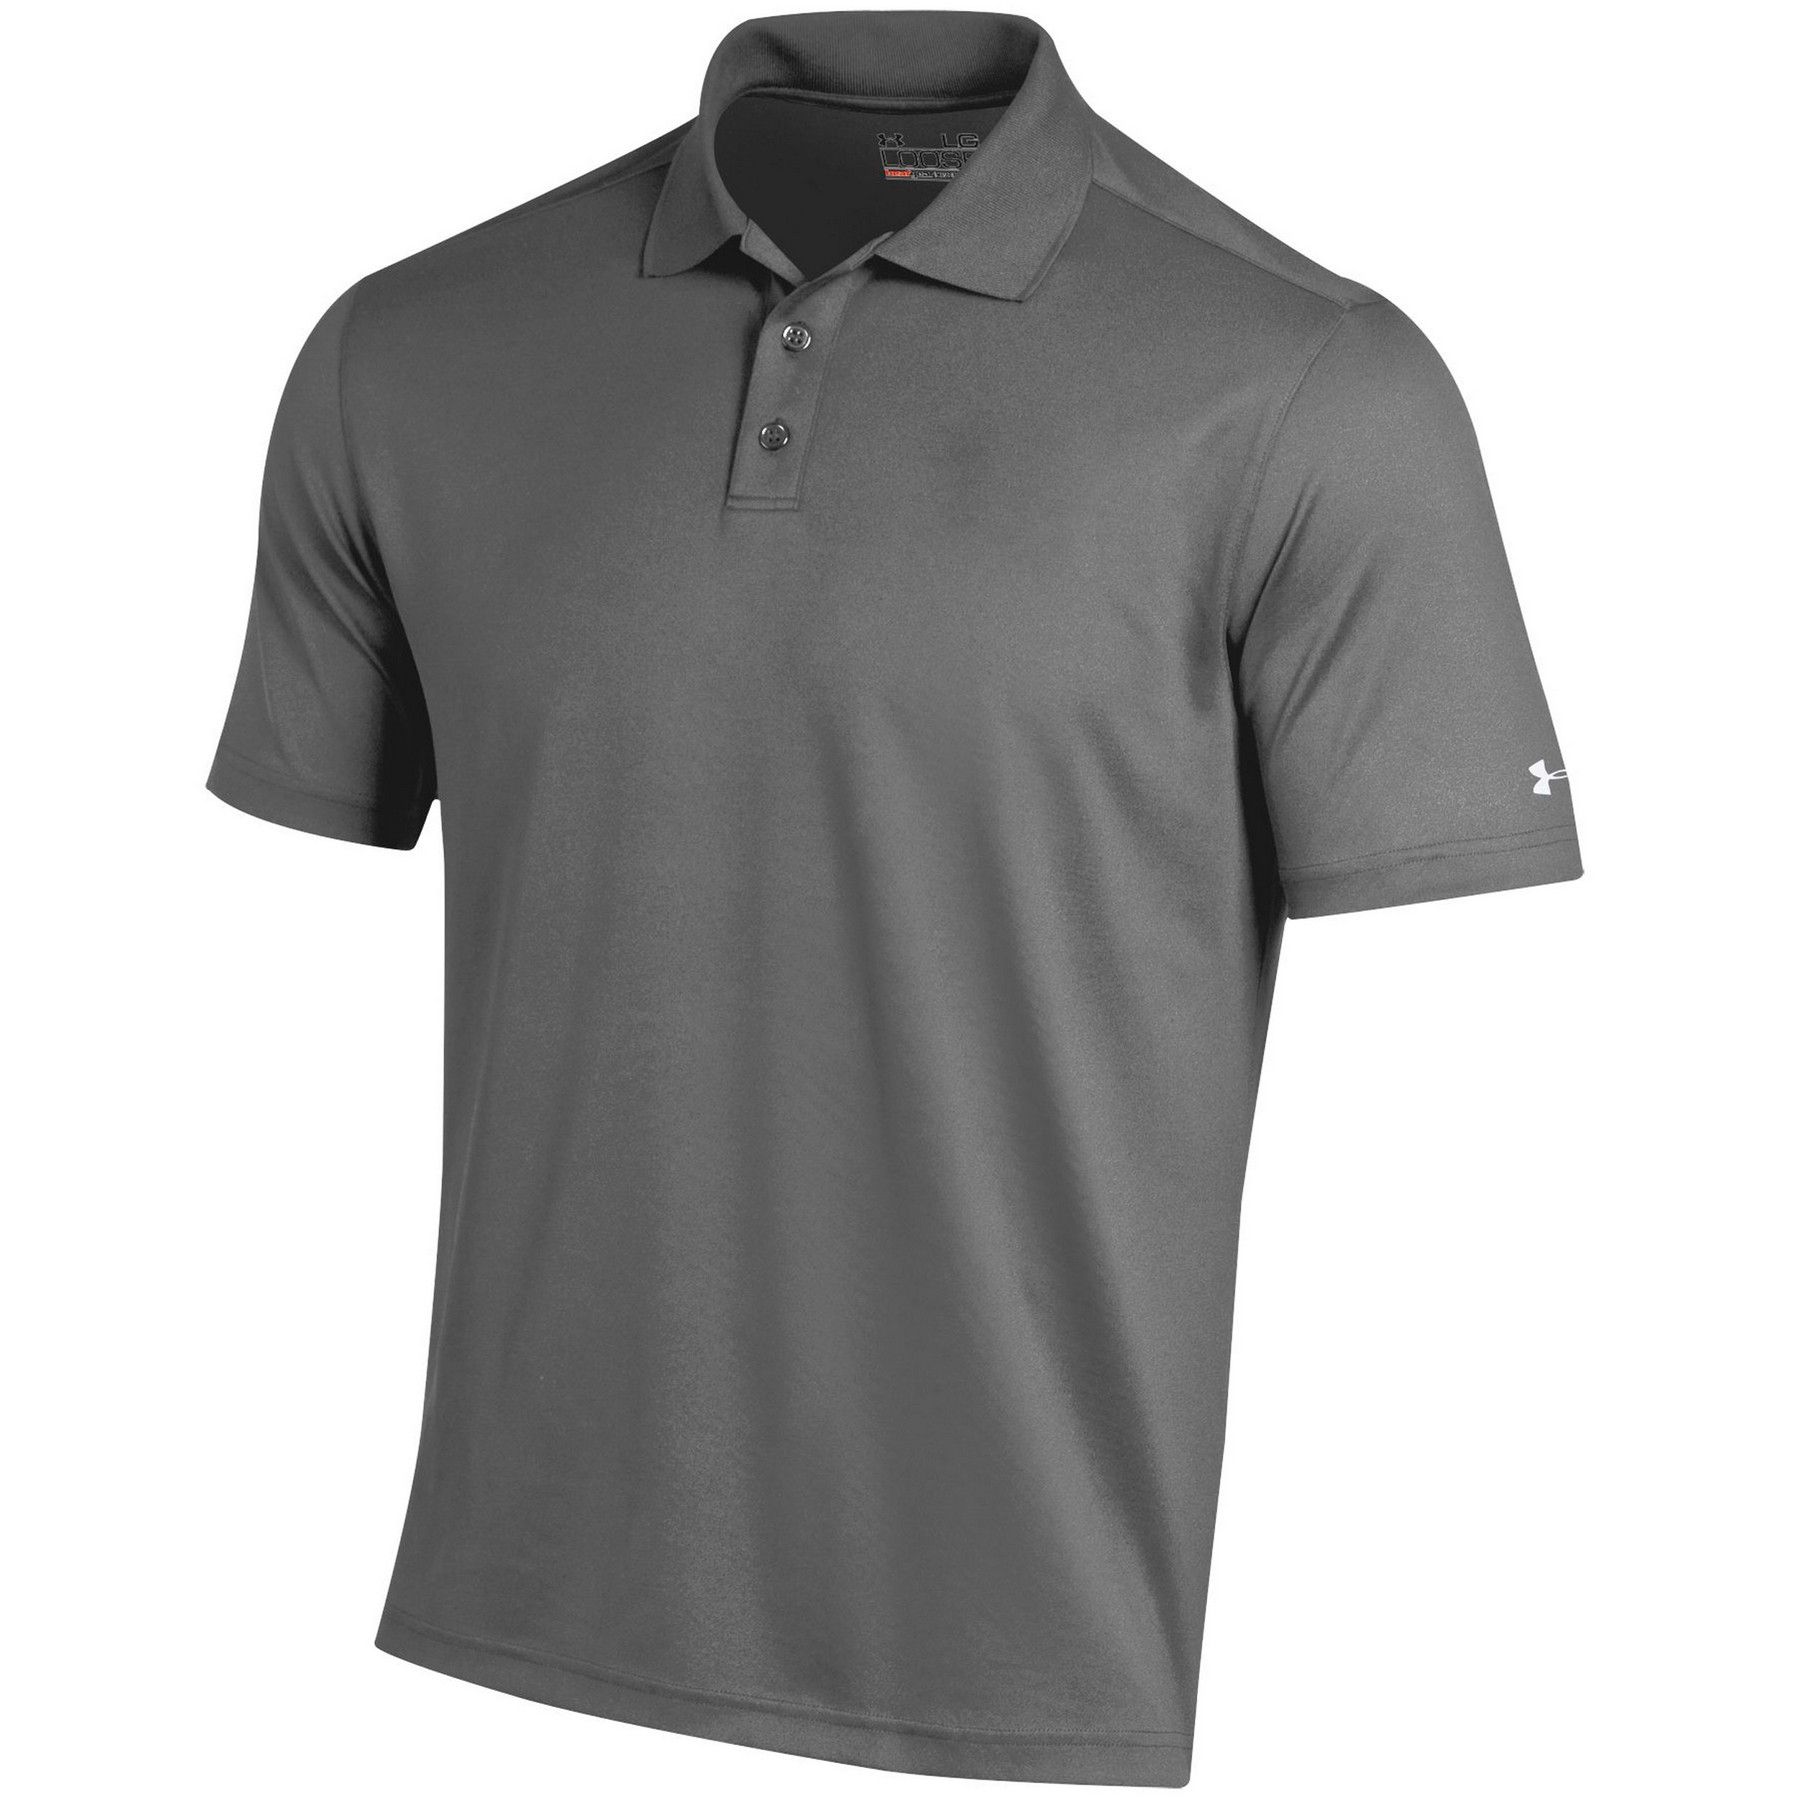 Under Armour Men's Performance Cresting Polo Shirt